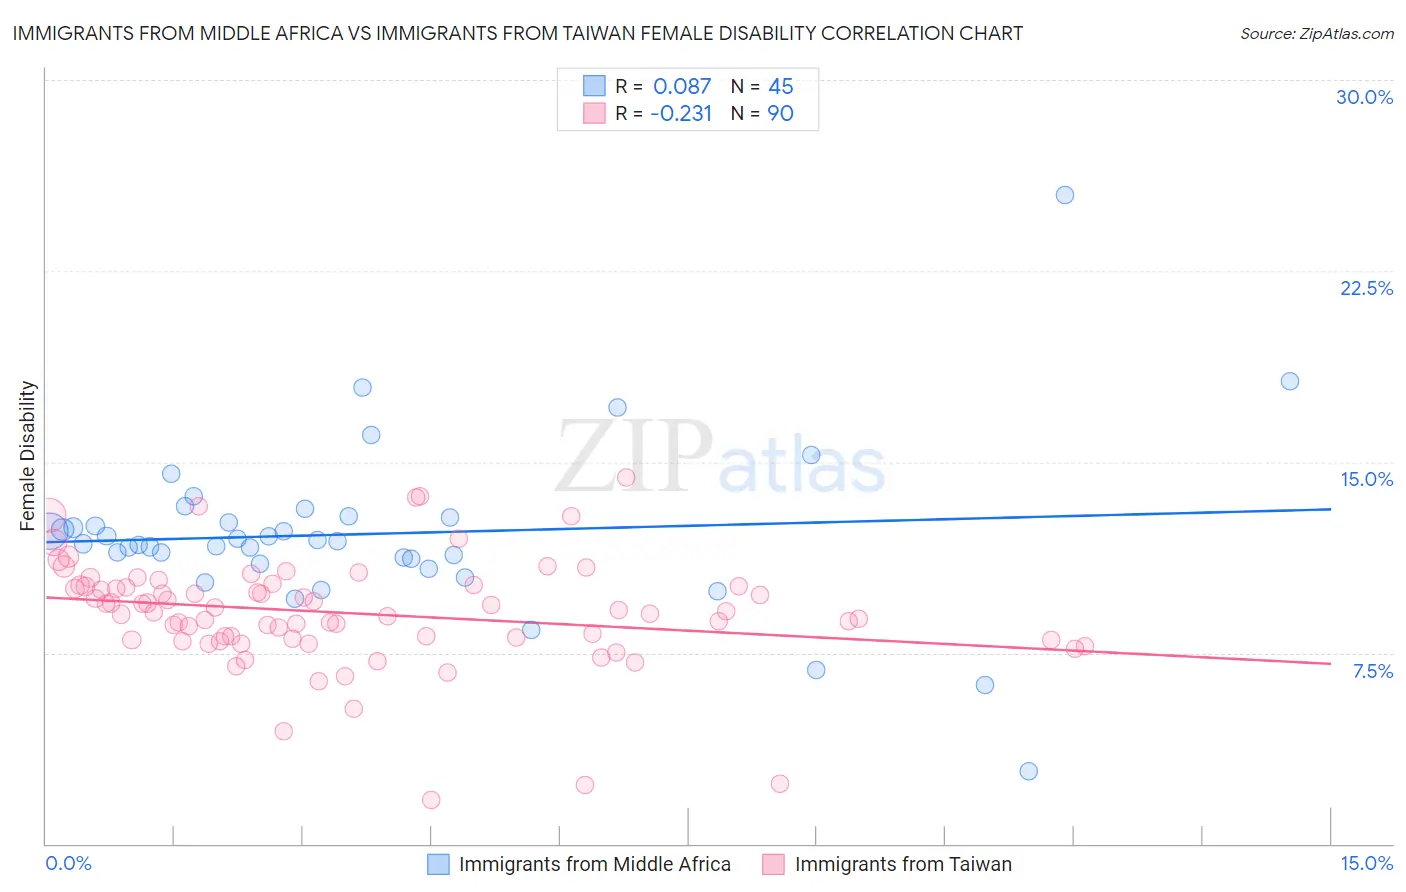 Immigrants from Middle Africa vs Immigrants from Taiwan Female Disability